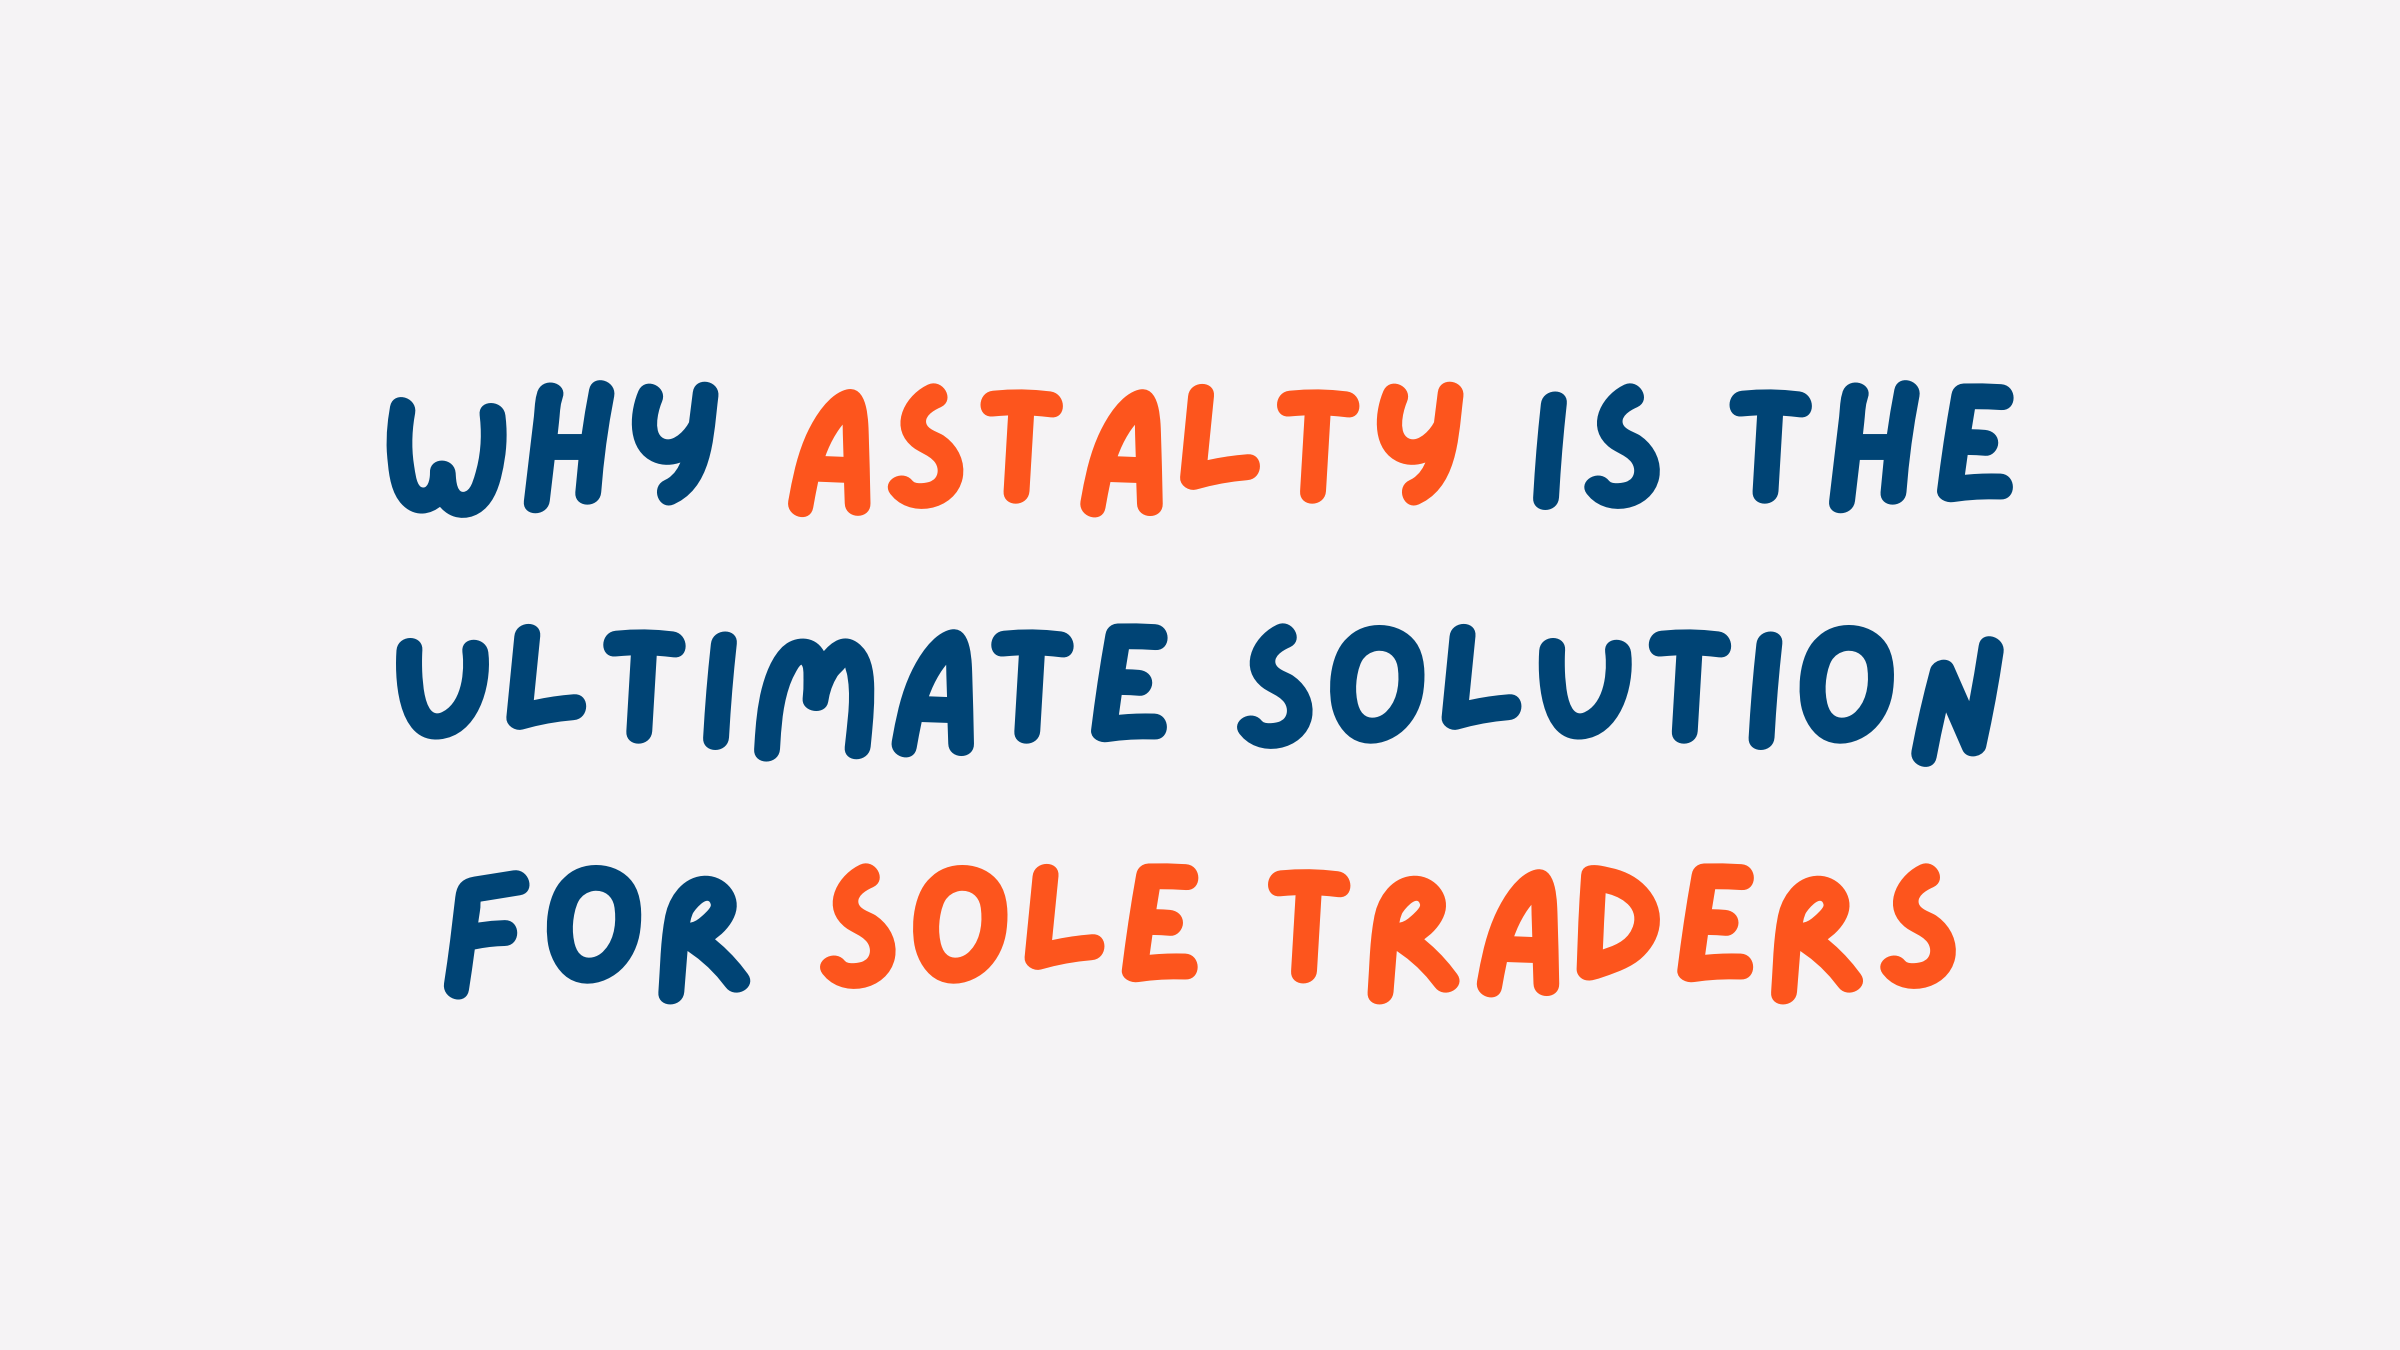 Why Astalty is the Ultimate Solution for Sole Traders